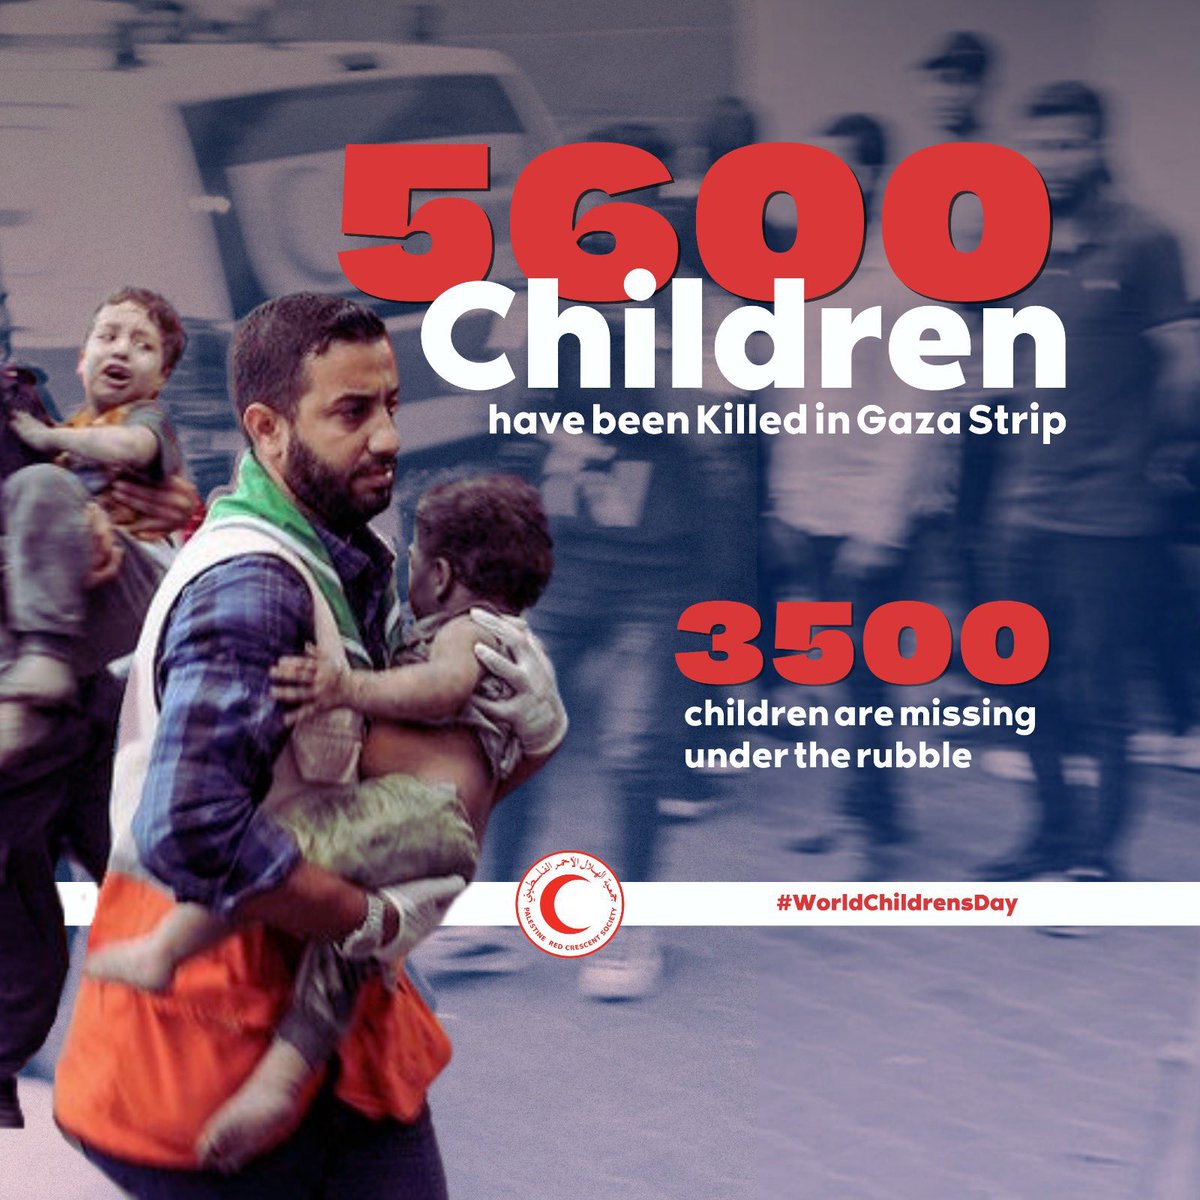 5,600 children have been killed in during the Israeli aggression on the #Gaza Strip

3,500 children are missing / waiting rescue under the rubble

+7000 children are waiting for emergency reconstructive surgery

#WorldChildrenDay